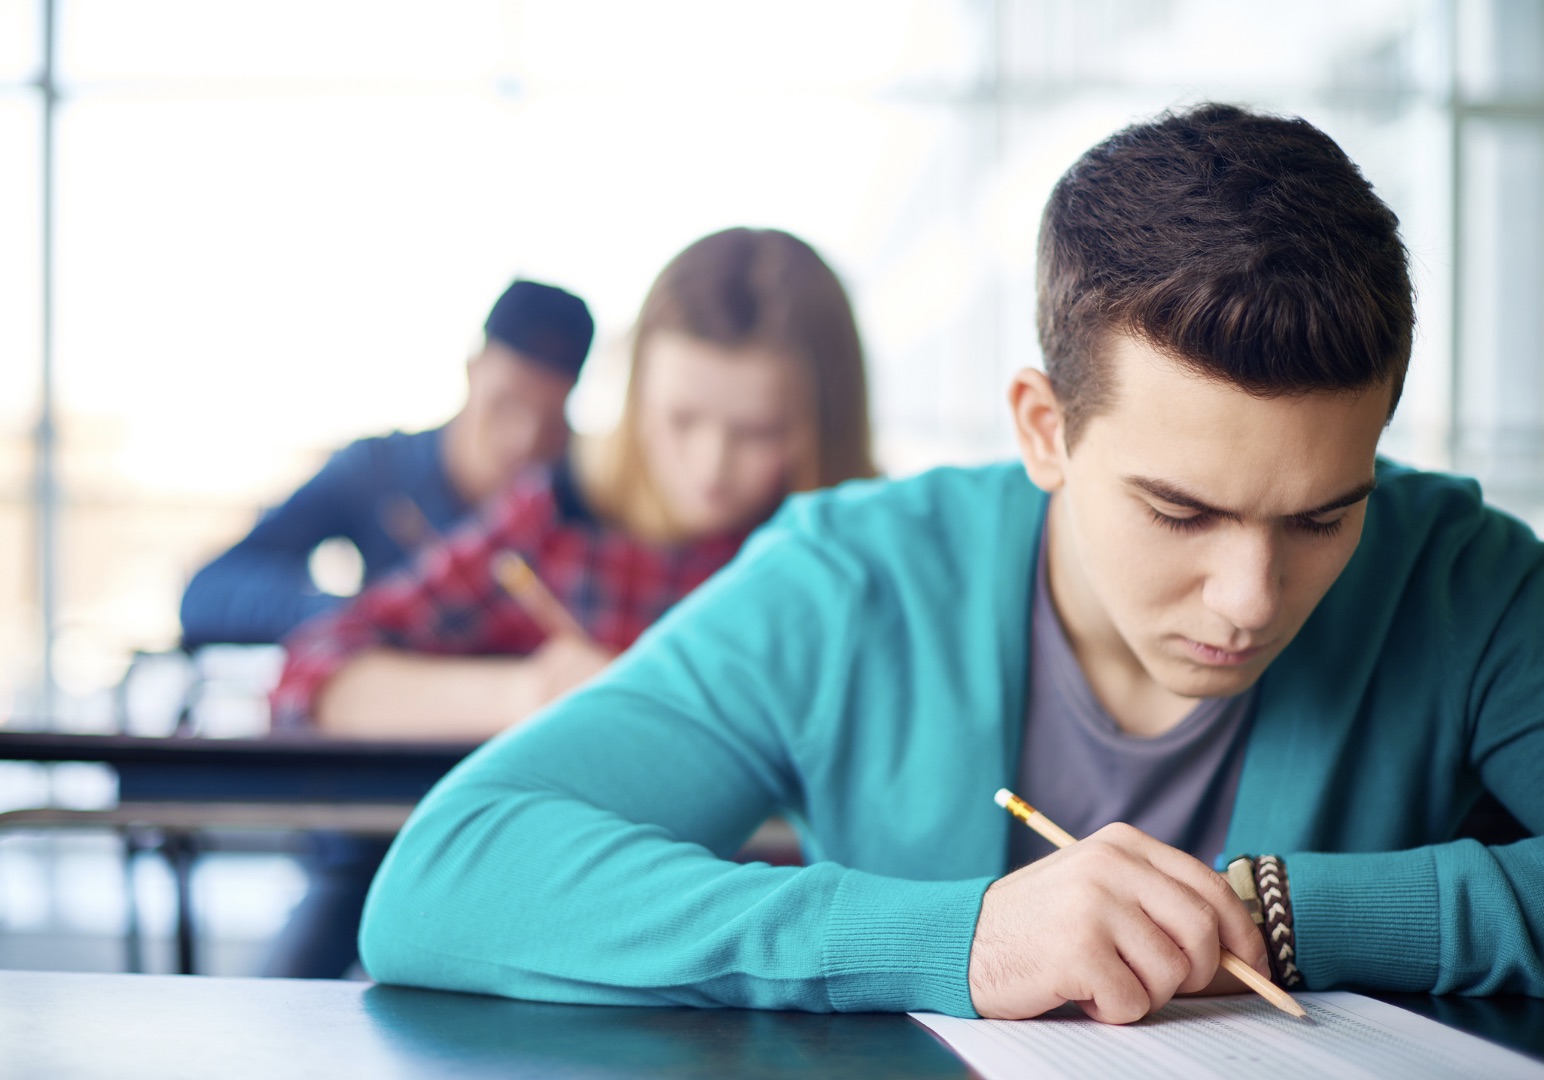 Overcome TEST ANXIETY